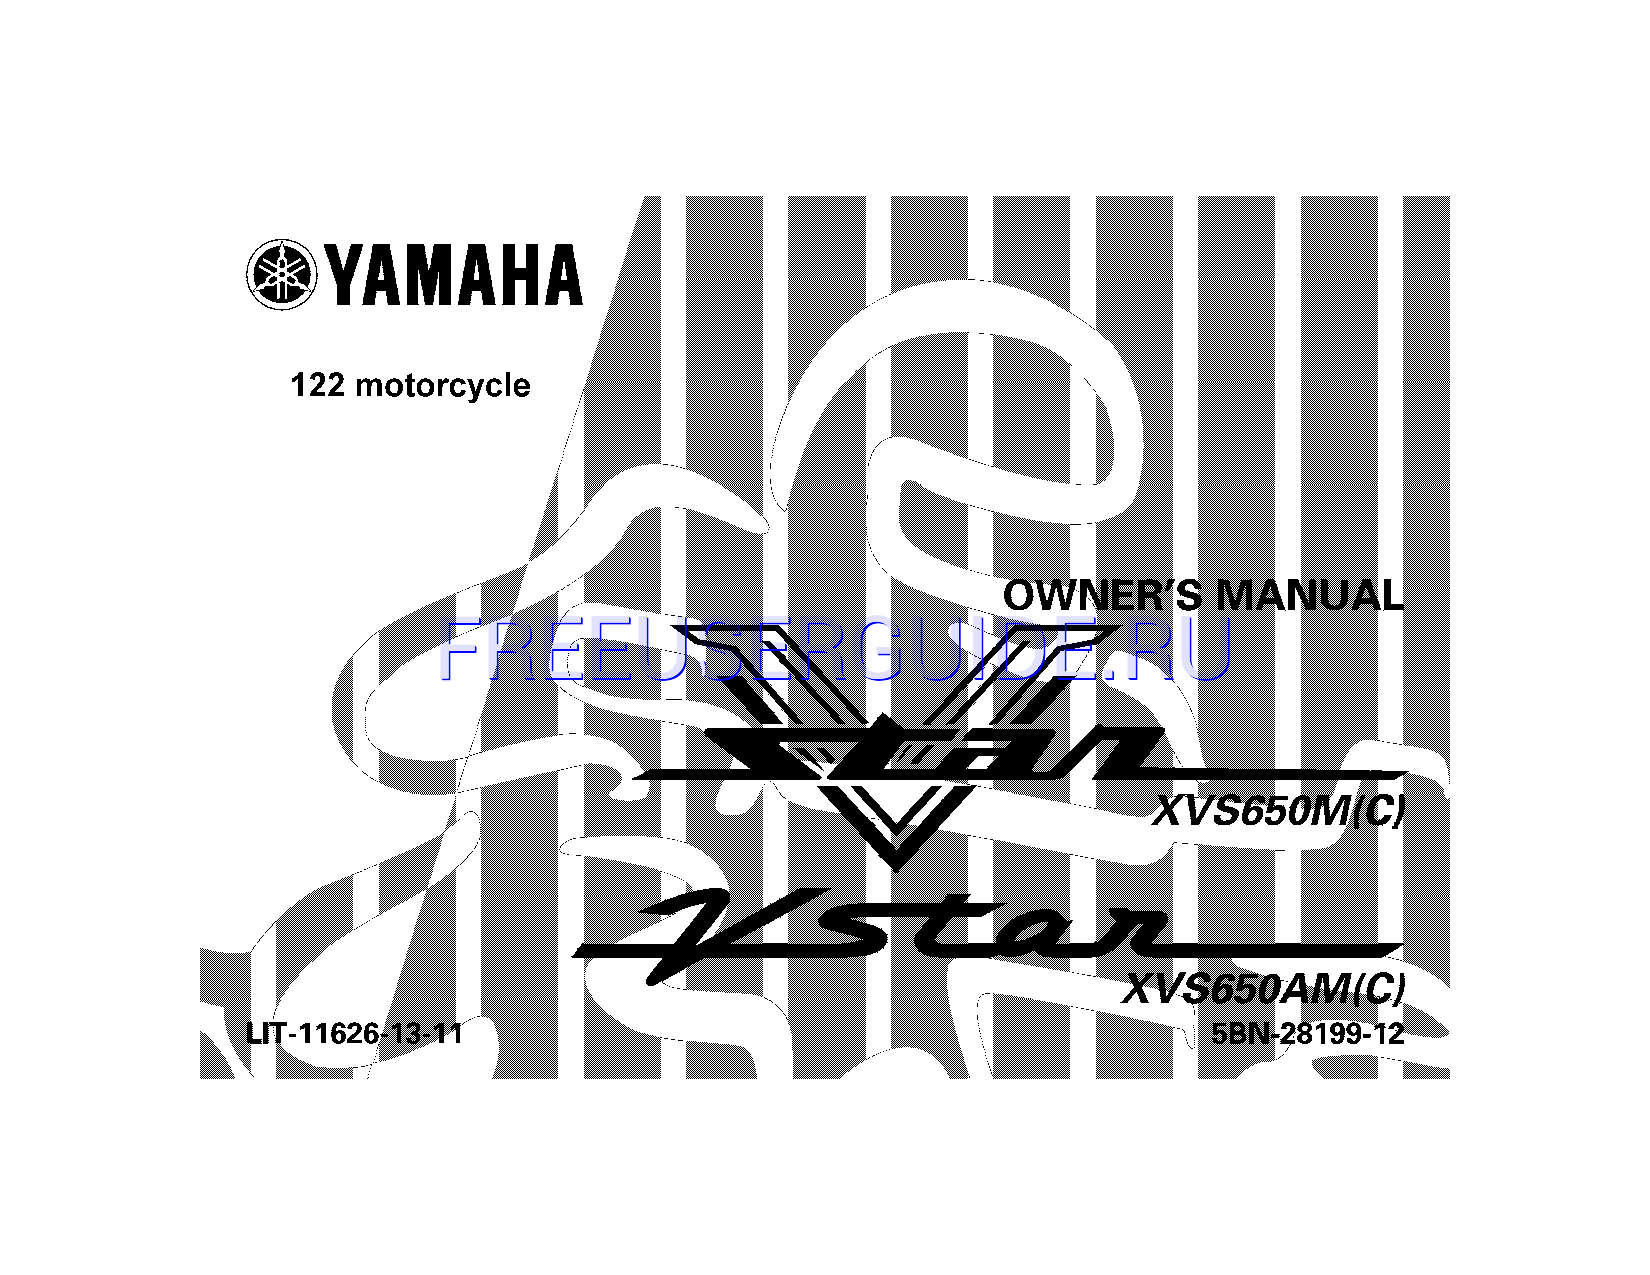 Read online Owner's Manual for Yamaha 2000 V Star Custom (Page 1)